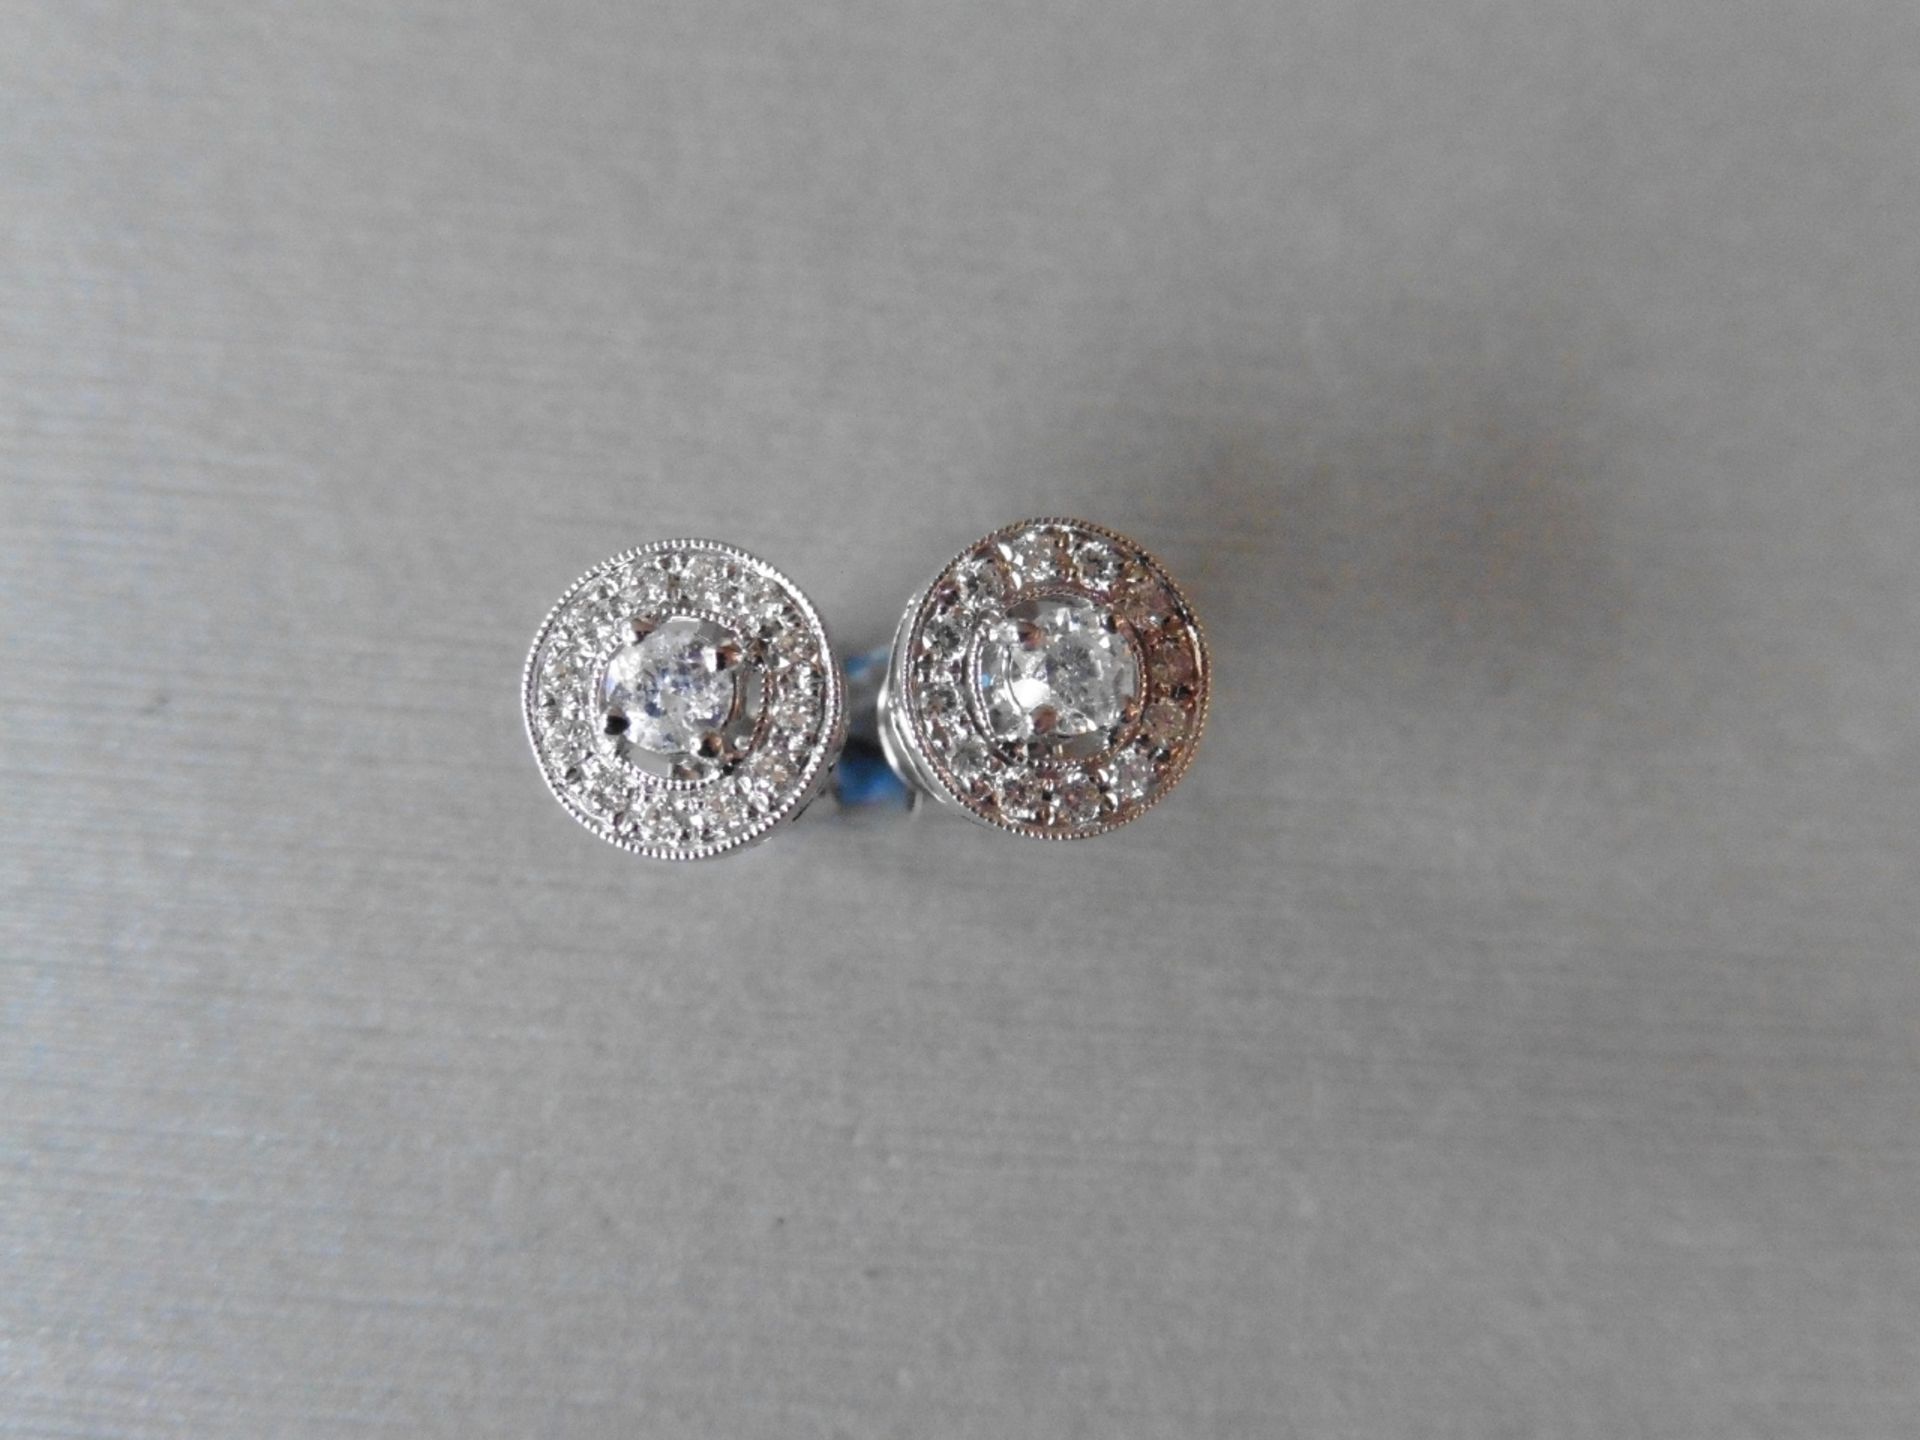 0.32ct diamond set cartier style stud earrings set in 18ct gold. Set with brilliant cut diamonds,